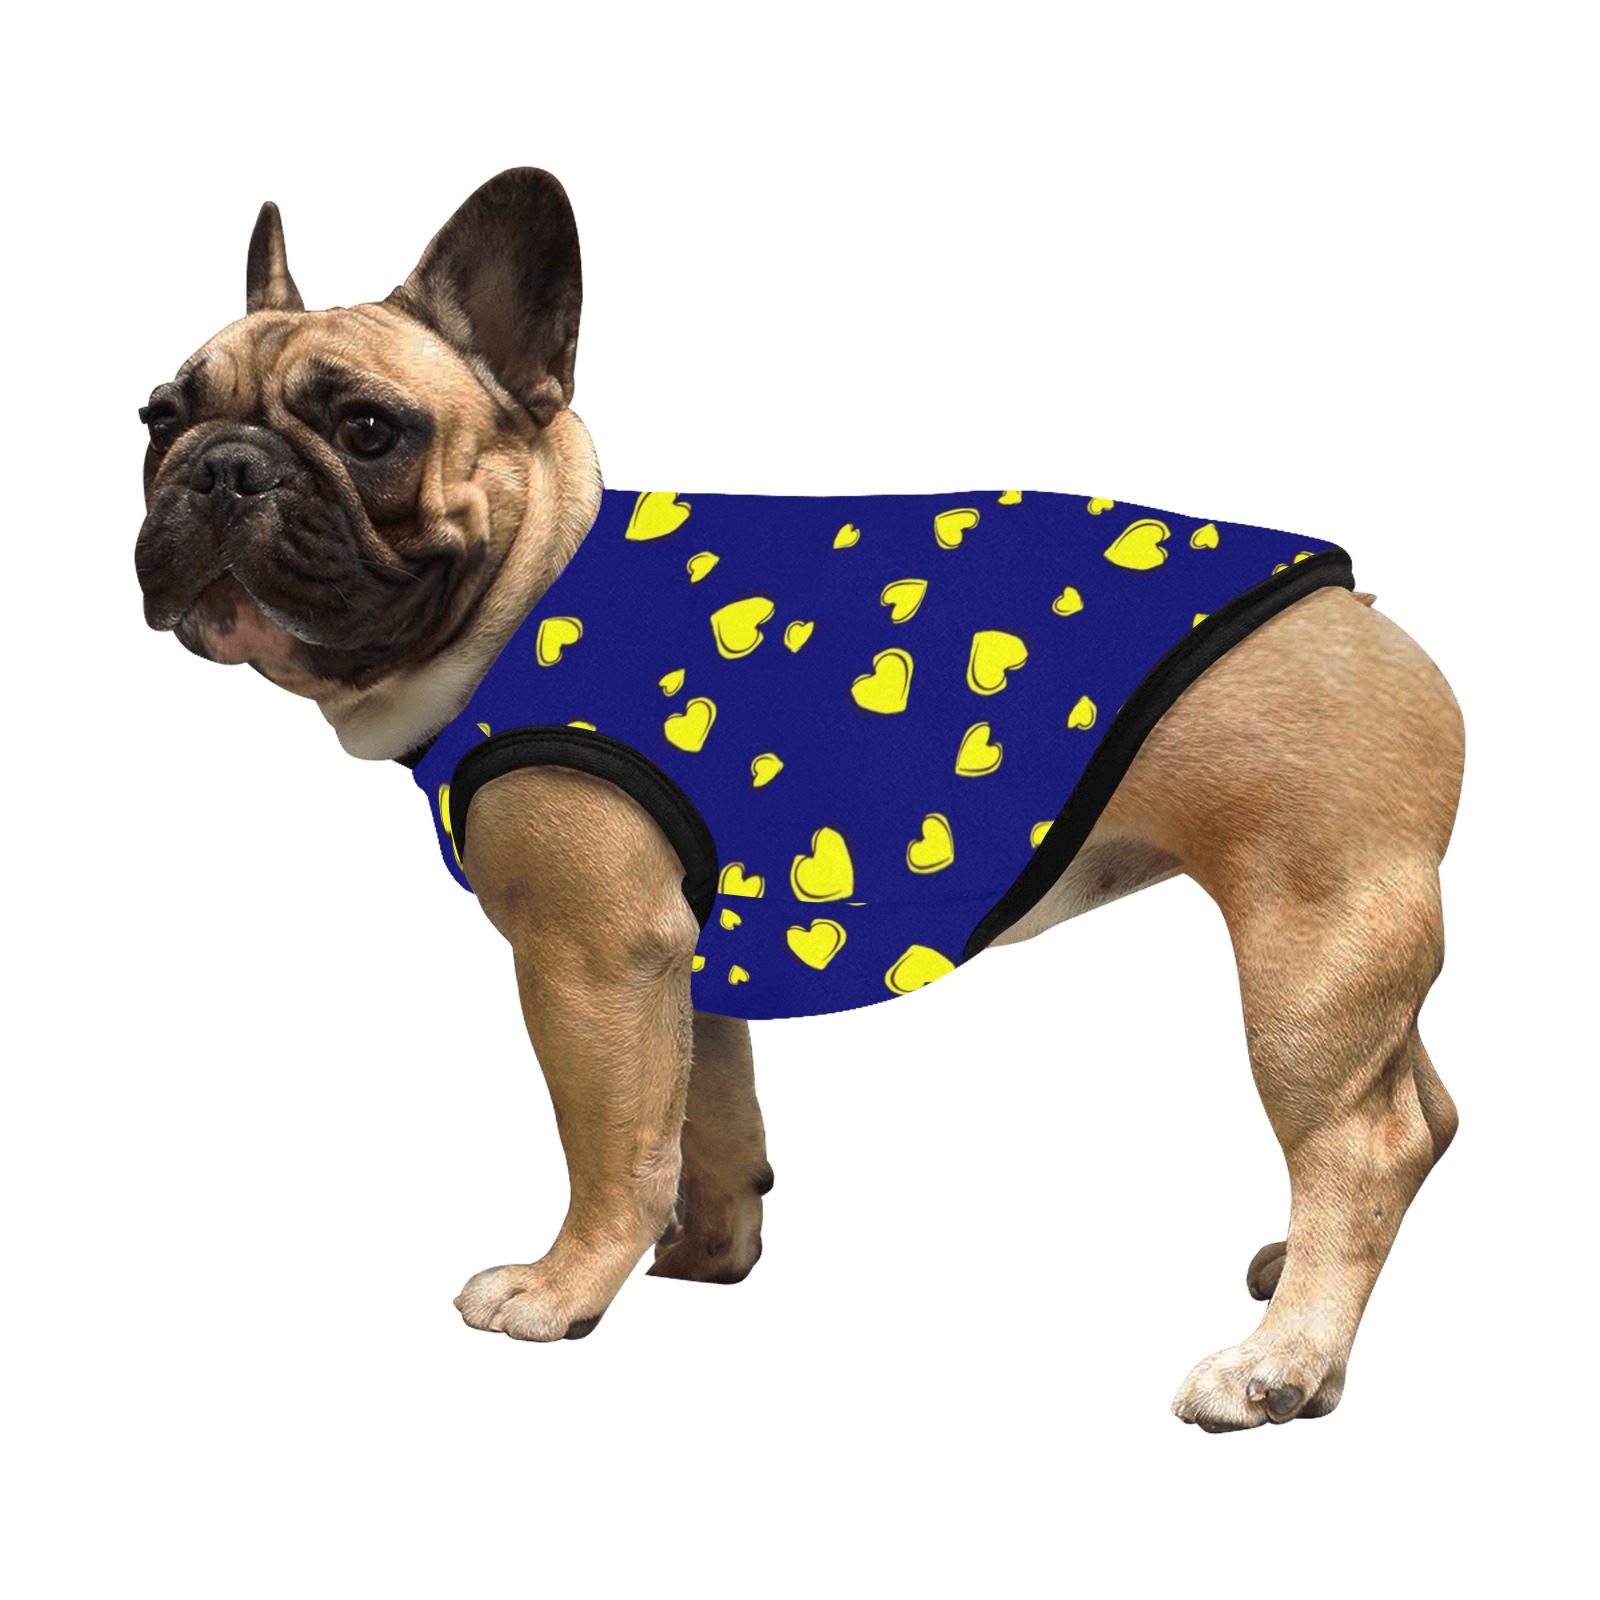 Yellow Hearts Floating on Blue All Over Print Pet Tank Top